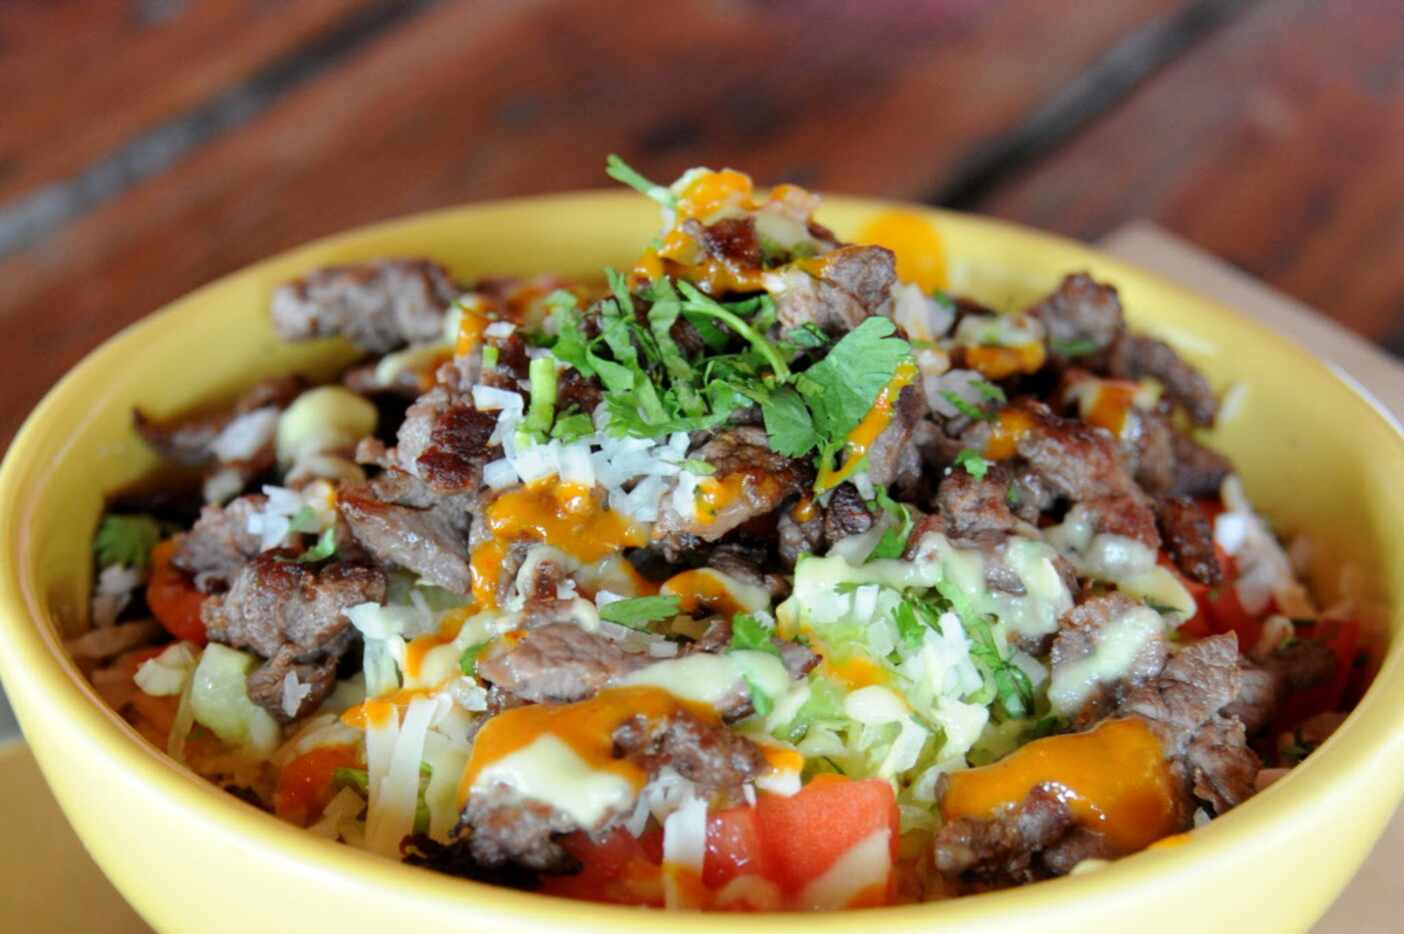 The bistek bowl features mixed greens, rice, beans, and cheese at La Ventana in Addison, TX...